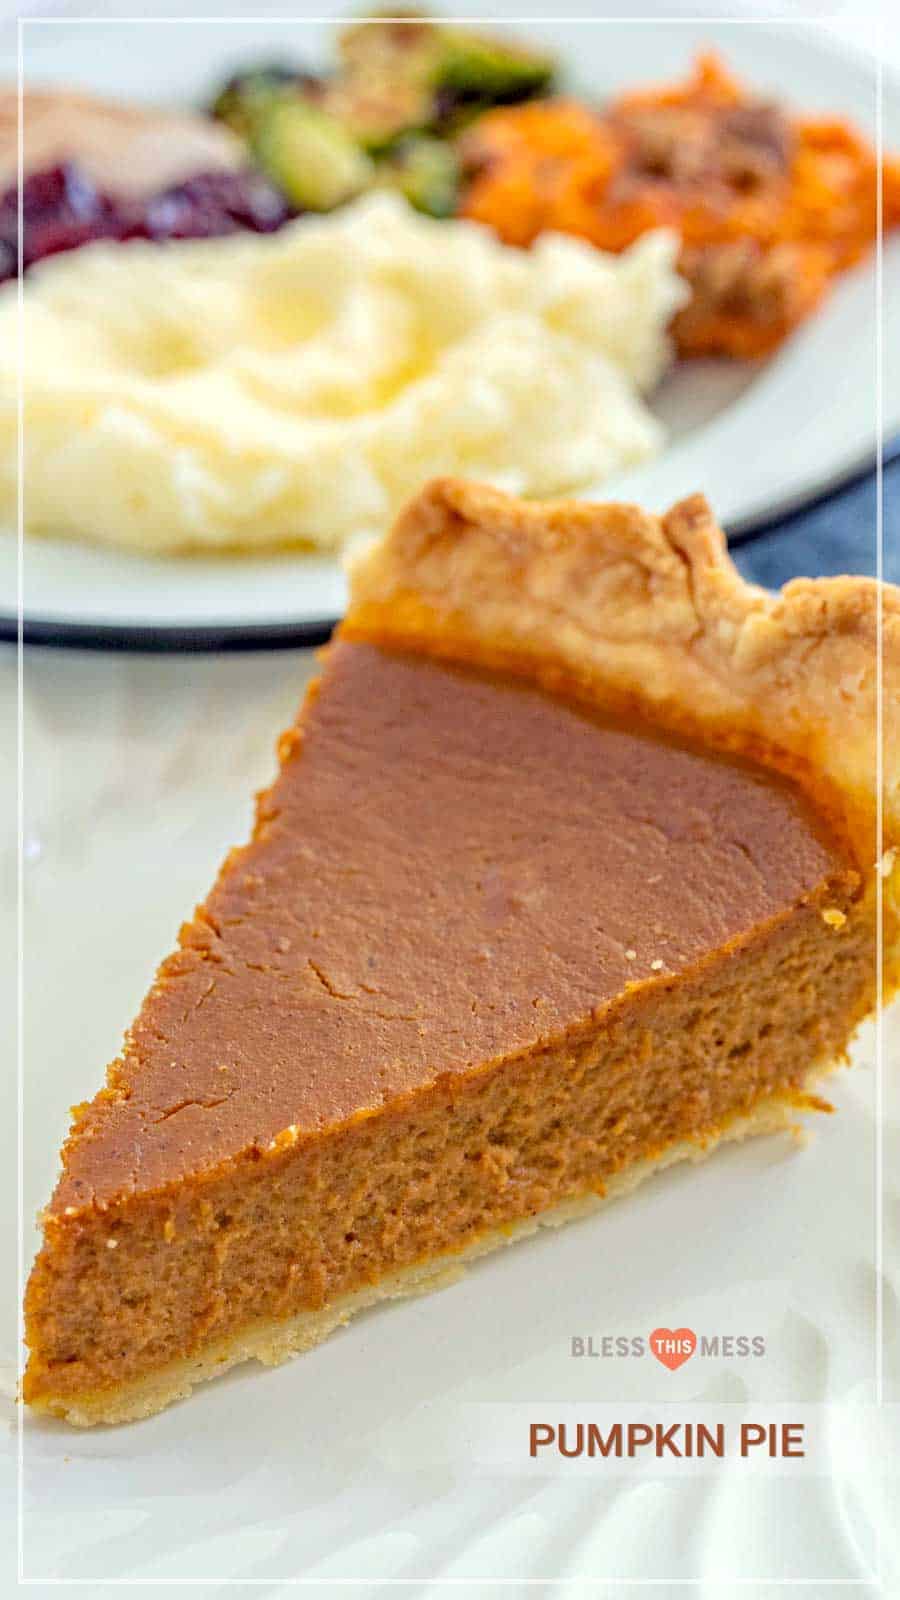 Pumpkin pie is a classic holiday dessert staple that is super easy to make at home for your loved ones and has all the warming, sweet, lovely layers of flavor you love in pumpkin pie! Thanksgiving is nearly here, and pumpkin pie is a MUST -- and it's way easier than you might expect to make from scratch! #pumpkinpie #pie #pierecipe #holidaypie #pumpkinrecipes #thanksgivingrecipes #holidaybaking #holidayrecipes